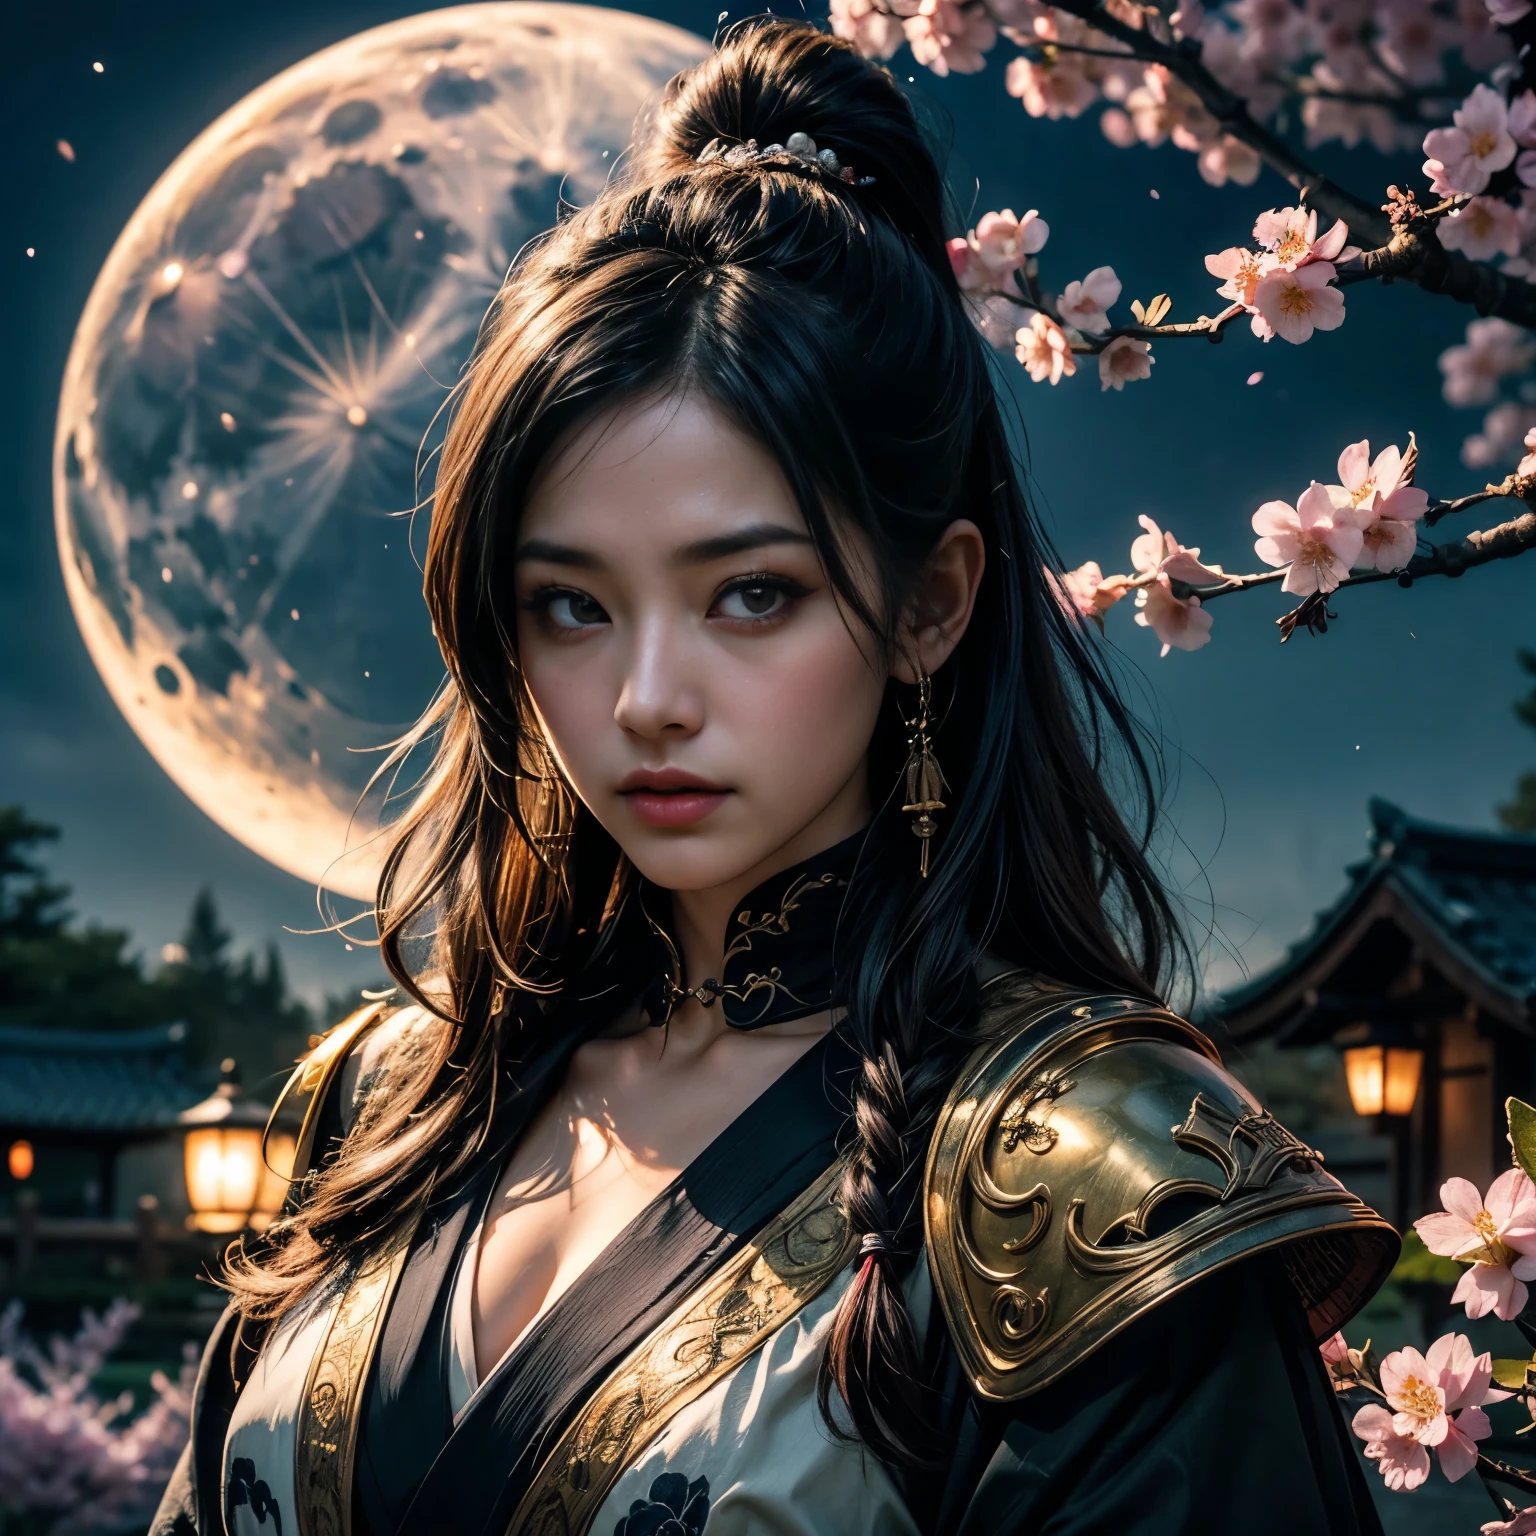 1. Scene description:
 - An assassin in the form of a female samurai wearing a skull mask。 （A girl dressed as a samurai with a skull mask-like face）
 - Detailed facial features: sharp eyes、pronounced nose、lips。 (Beautiful and detailed eyes、Beautiful and detailed lips)
 - Additional details: Long eyelashes、Intense expression、A strong and confident posture。 (Very detailed目と顔、Long eyelashes)
2.material:
 ·An illustration：Characters are depicted by hand.、
 - Media: High resolution digital illustration、
 - Artistic style: Combining elements of dark fantasy and traditional Japanese art、
3. Scene details:
 - background: Cherry blossoms in full bloom and a moonlit garden、
 - Lighting: The soft moonlight casts a shadow、Illuminates the character&#39;s facial features、
 -atmosphere: Mysterious and fascinating、Full of expectations、
4.image quality:
 - highest quality、High resolution：（highest quality、High resolution）
 - Super detailed：（Super detailed）
 - Realistic style: (Realistic)
 - Bright colors：（Bright colors）
5. Color Palette:
 - Main color: Black in the character&#39;s clothing and mask、gray、Shades of silver、
 ·Cherry tree：Gentle pink and white、
 - Moonlit Sky: Deep blue and purple with a silvery tint、
6. Overall prompt:
With a face resembling a skull、Dressed as a samurai、A girl with beautiful eyes and lips、sheVery detailed目と顔、Long eyelashesを持っています、she、Combining dark fantasy with elements of traditional Japanese art、High resolutionのデジタルイラストで描かれています。The stage is illuminated by moonlight、A garden with cherry blossoms in full bloom、The light is soft moonlight、It casts shadows and illuminates the character&#39;s facial features.、The atmosphere is mysterious and fascinating.、Full of expectations、The image is of highest quality、High resolution、Very detailed、Photorealistic style、Color Palette、The character&#39;s costume and mask are black.、gray、Shades of silver included、Cherry trees have soft pink and white、The moonlit sky contains deep blues and purples with a silvery tint、